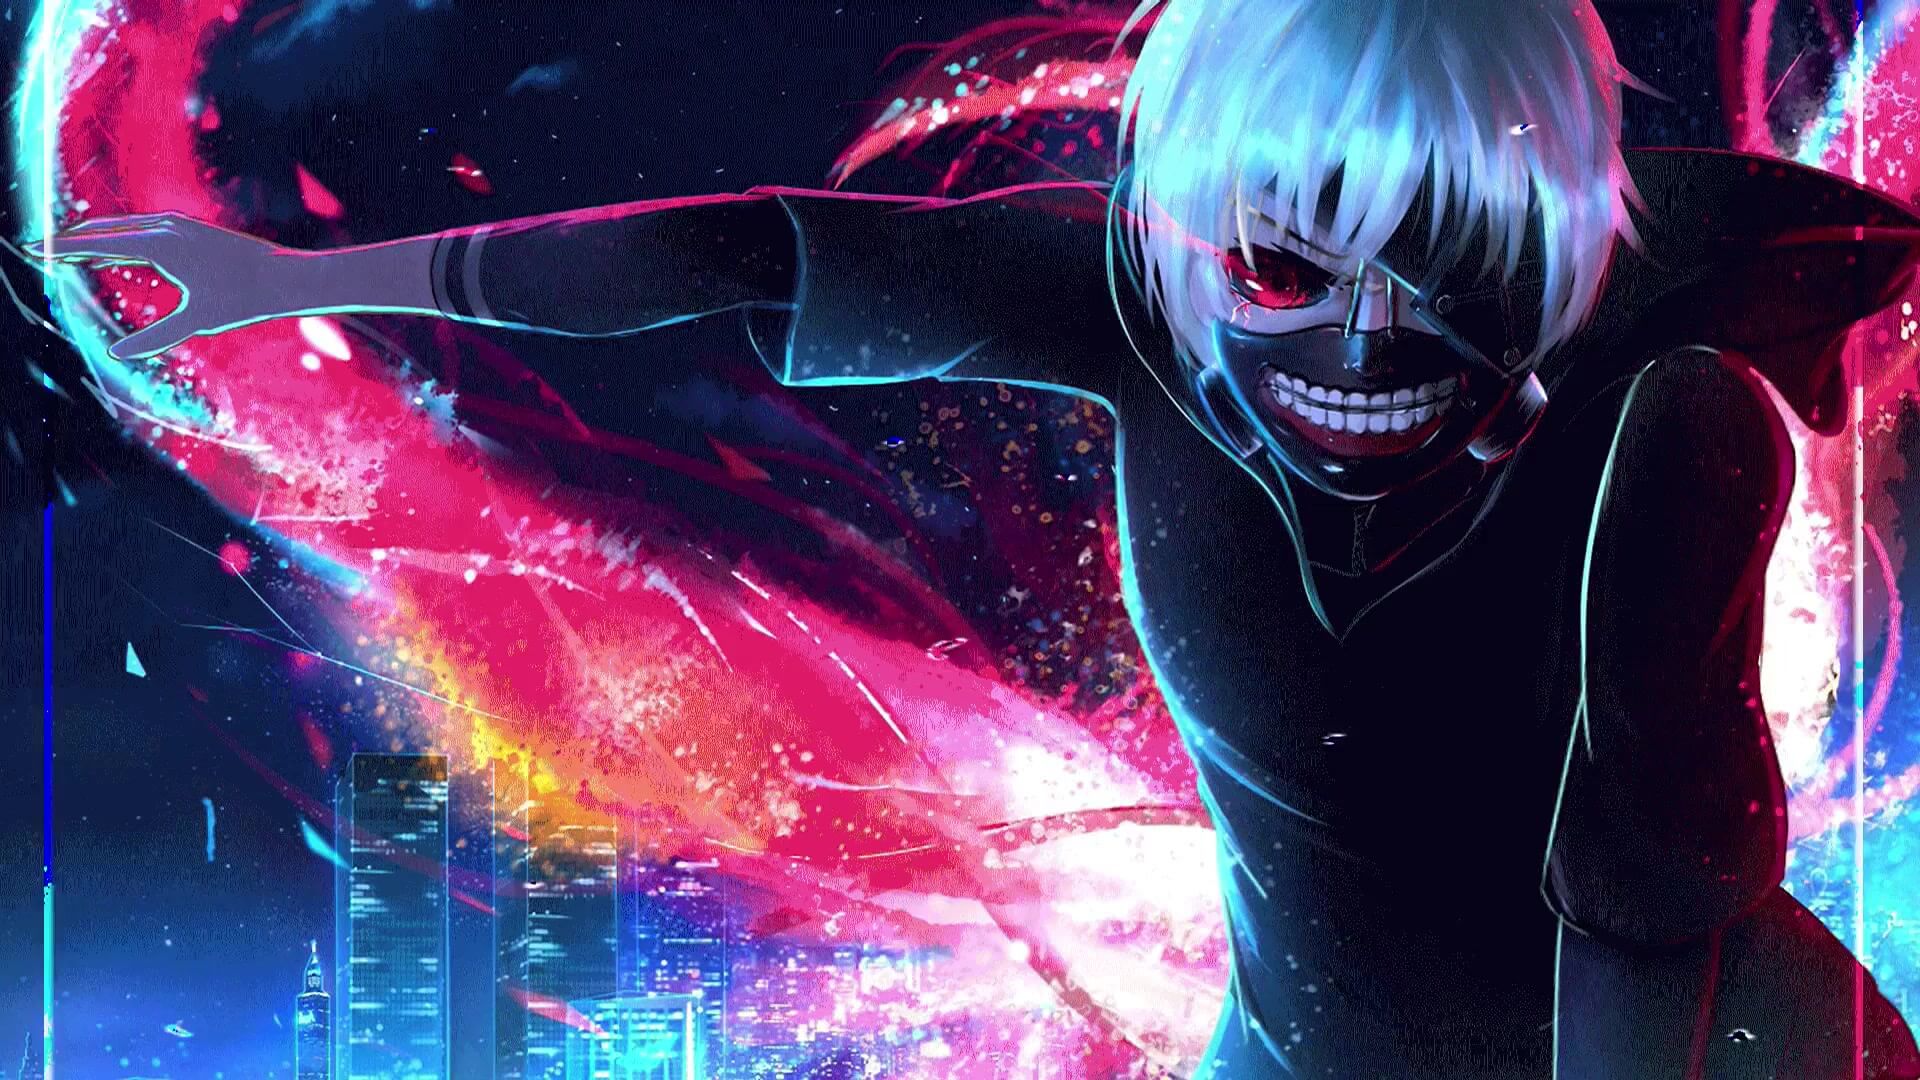 Tokyo Ghoul Anime Live Wallpaper